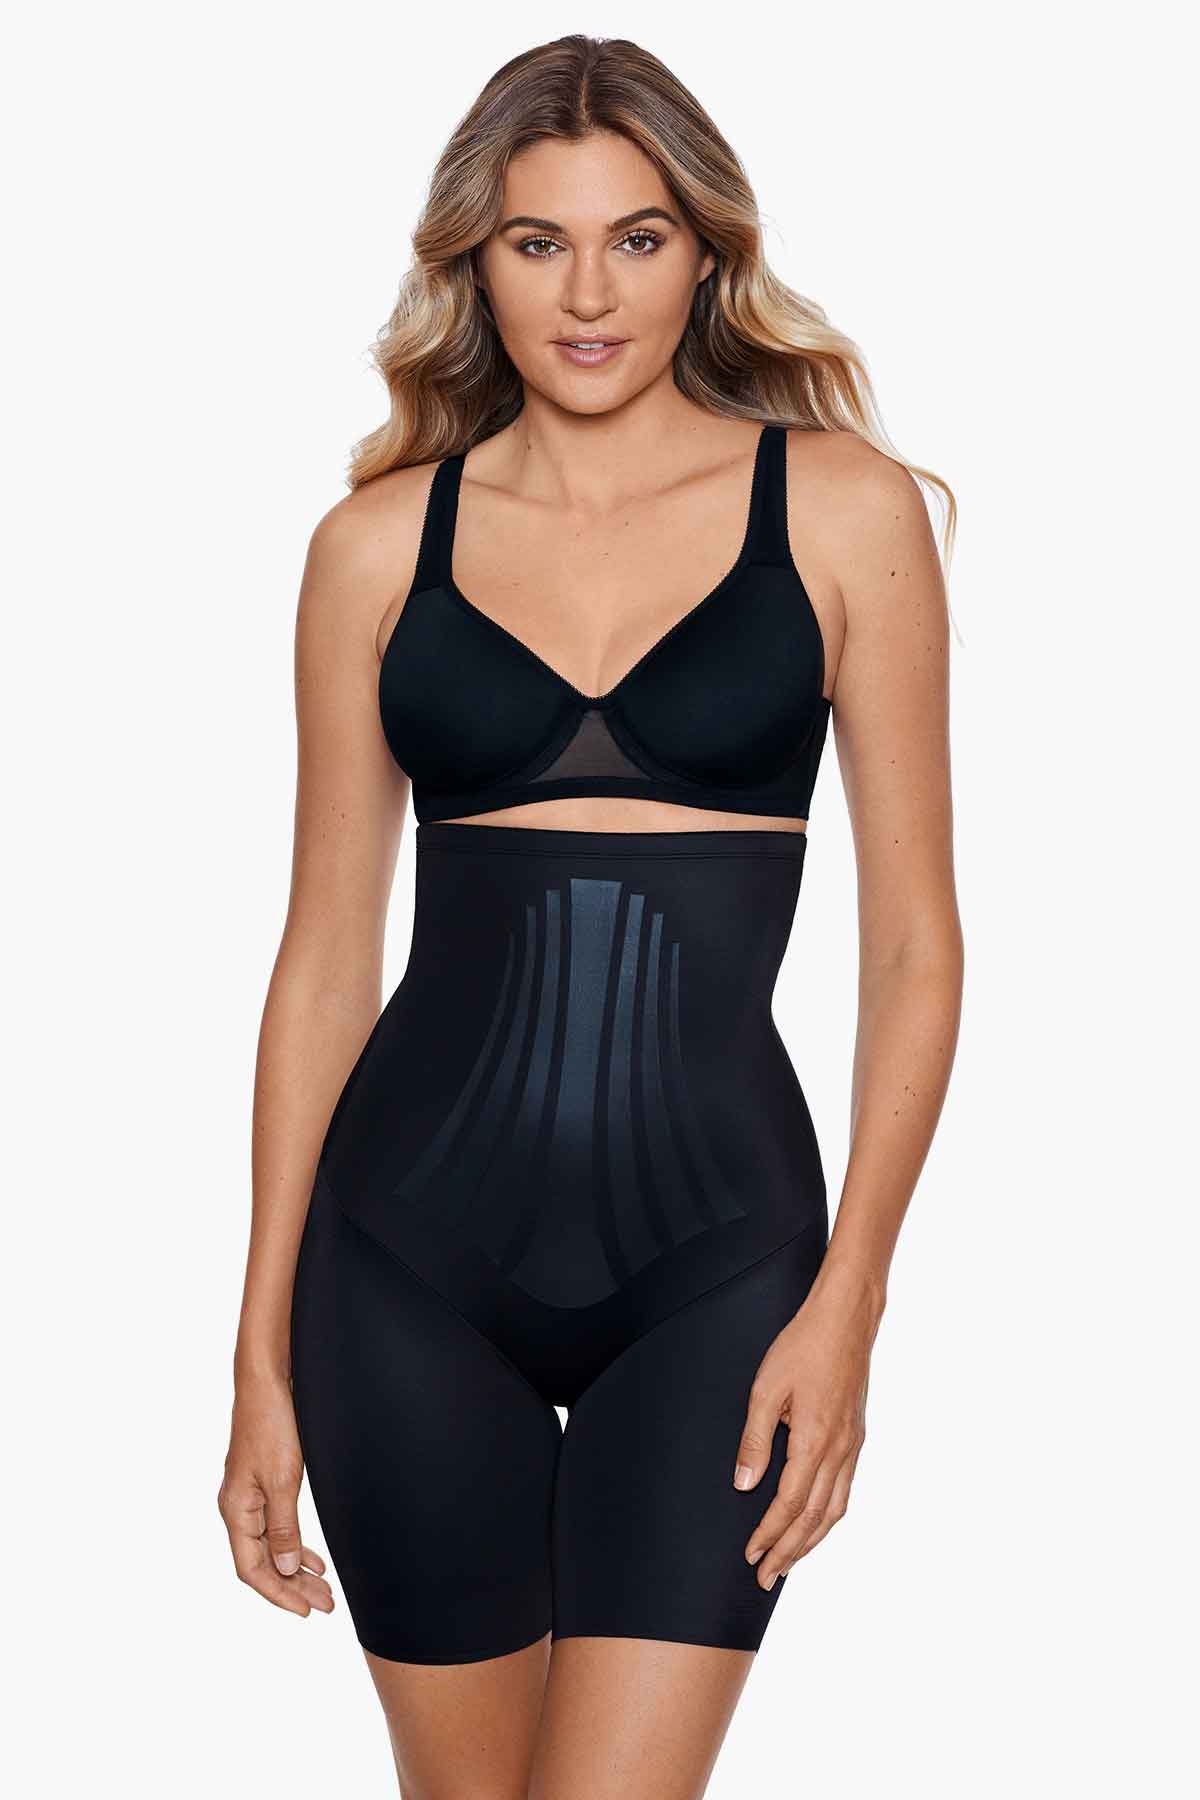 Miraclesuit High Waisted Thigh Slimming Shapewear Shorts